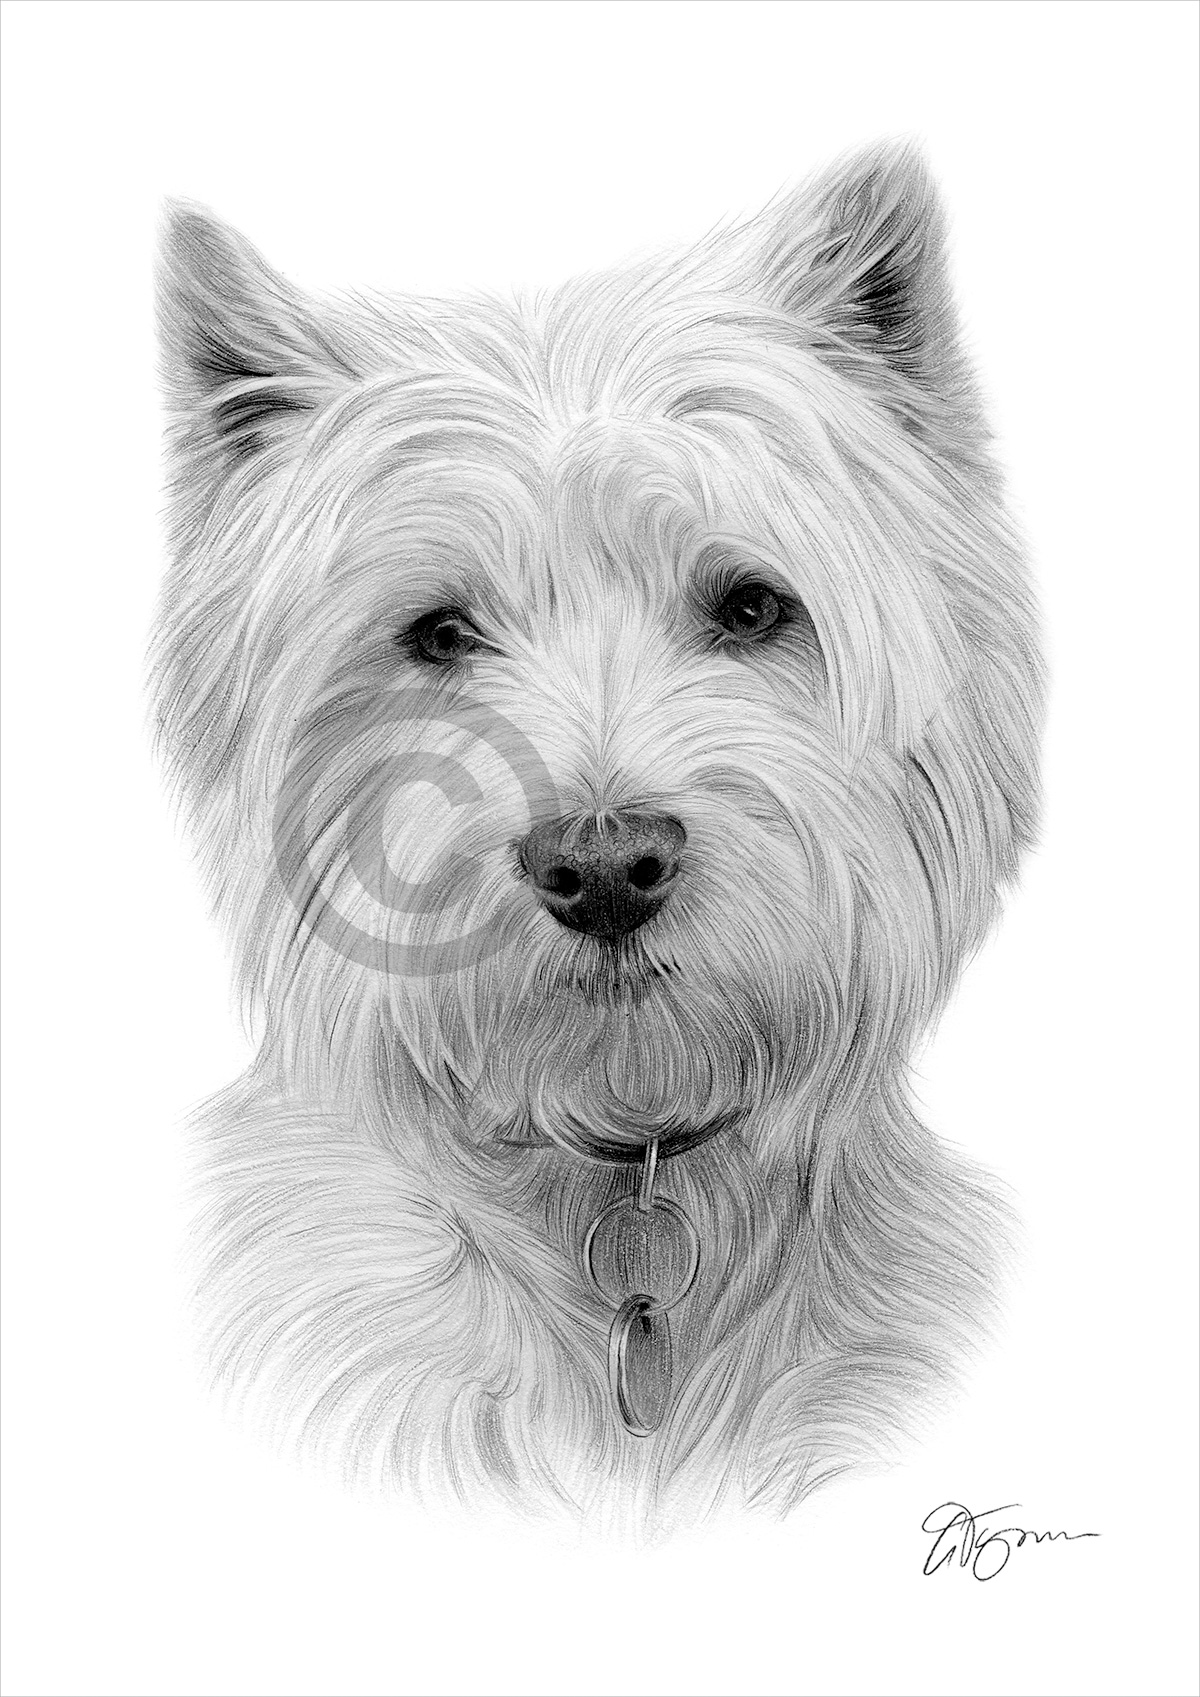 Pencil drawing of a west highland white terrier by artist Gary Tymon